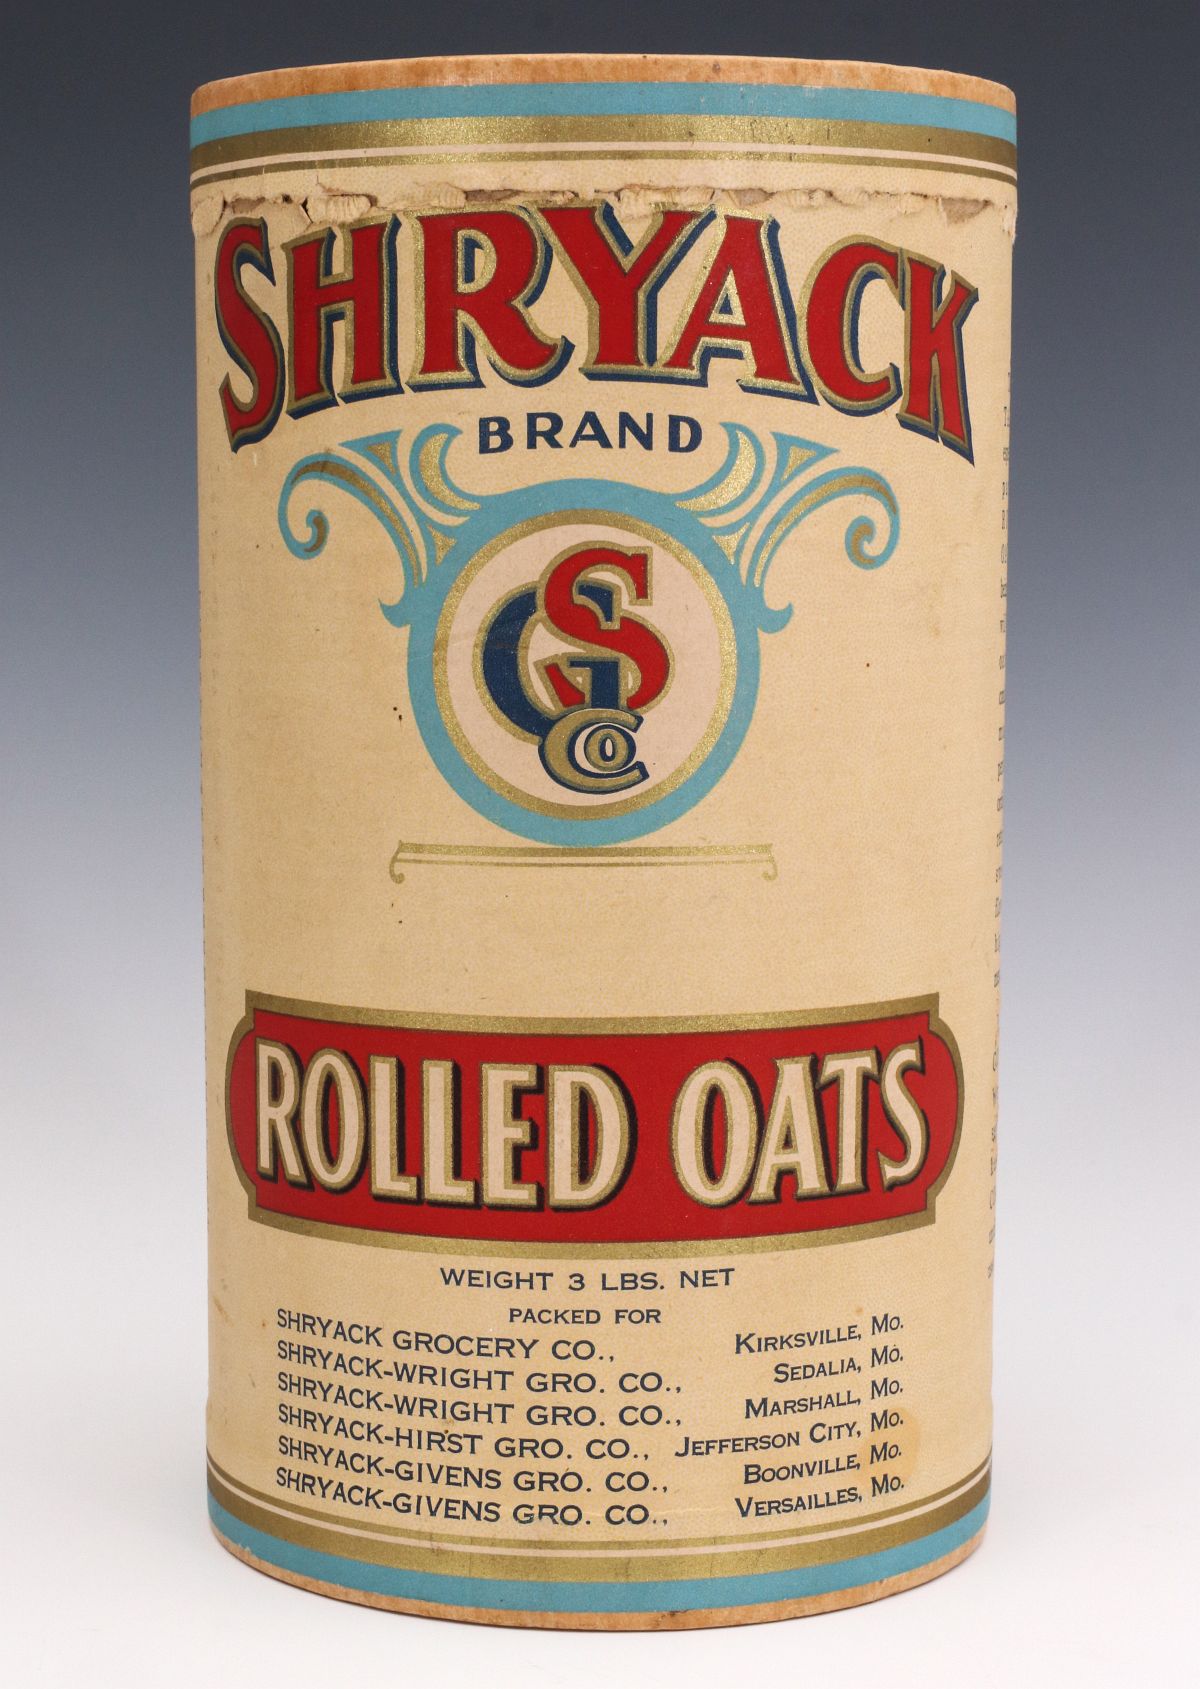 SHRYACK MISSOURI GROCERY ROLLED OATS CONTAINER